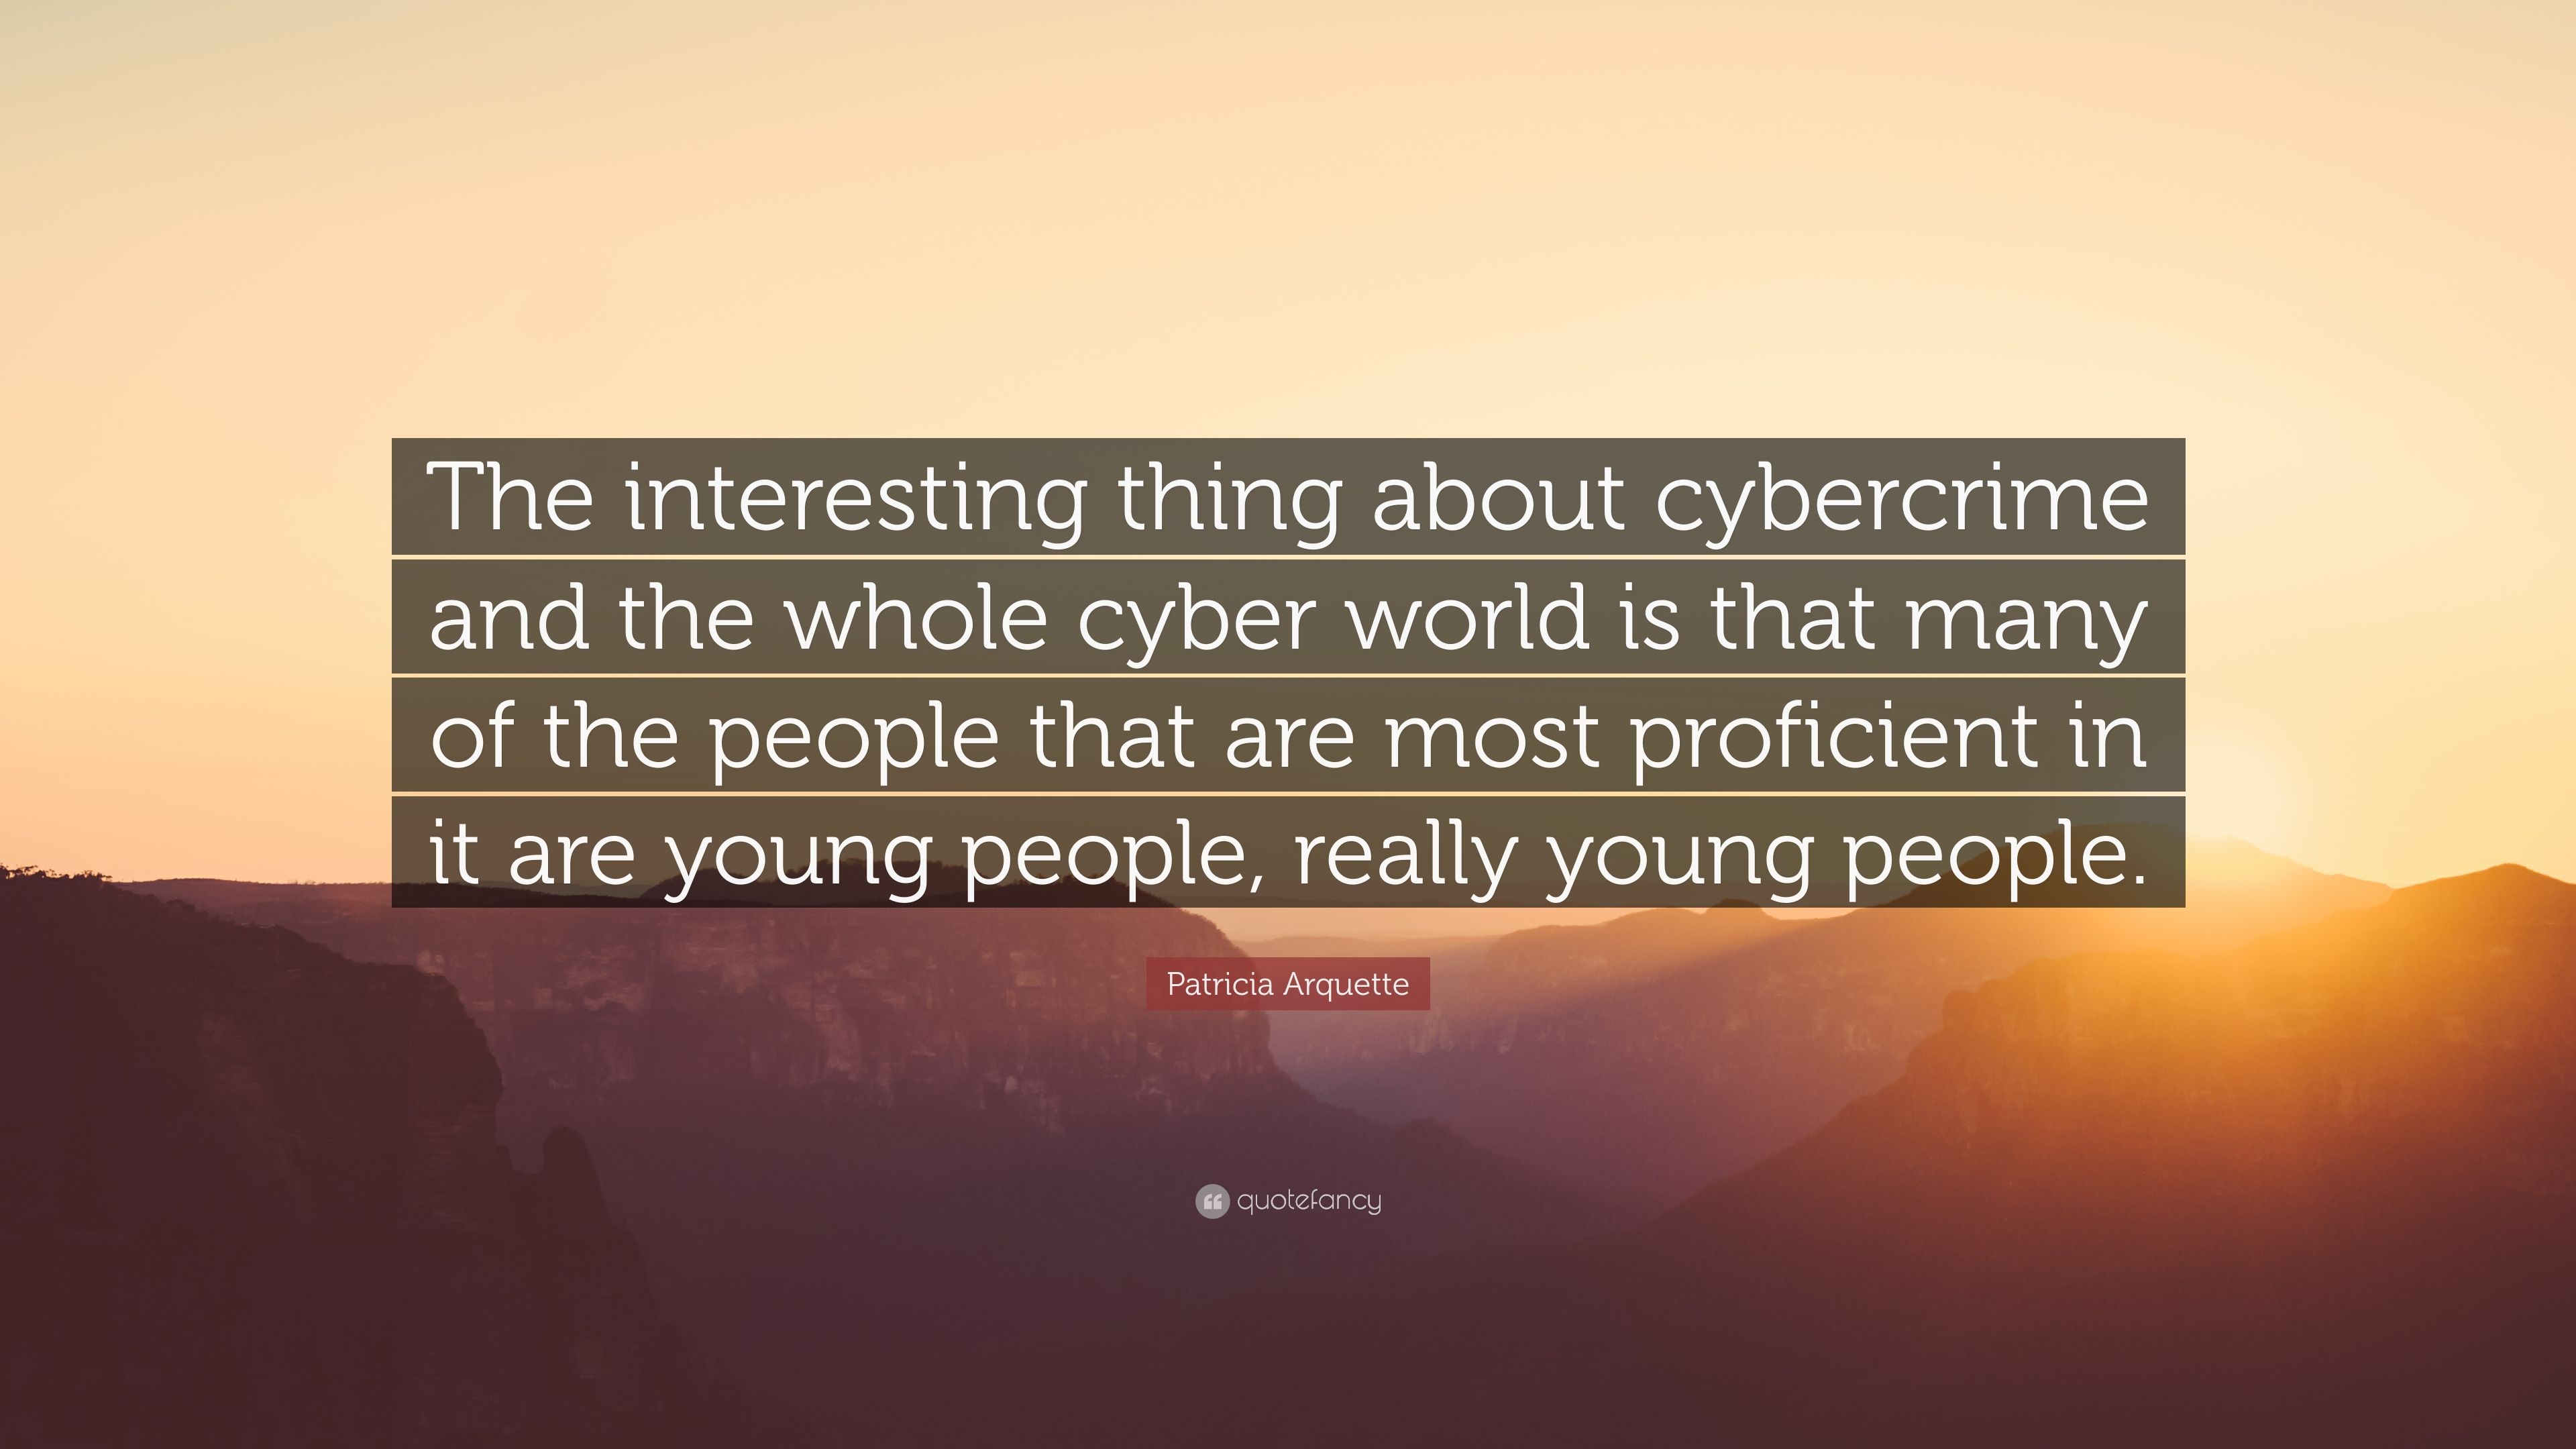 Patricia Arquette Quote: “The interesting thing about cybercrime and the whole cyber world is that many of the people that are most proficient in .” (7 wallpaper)